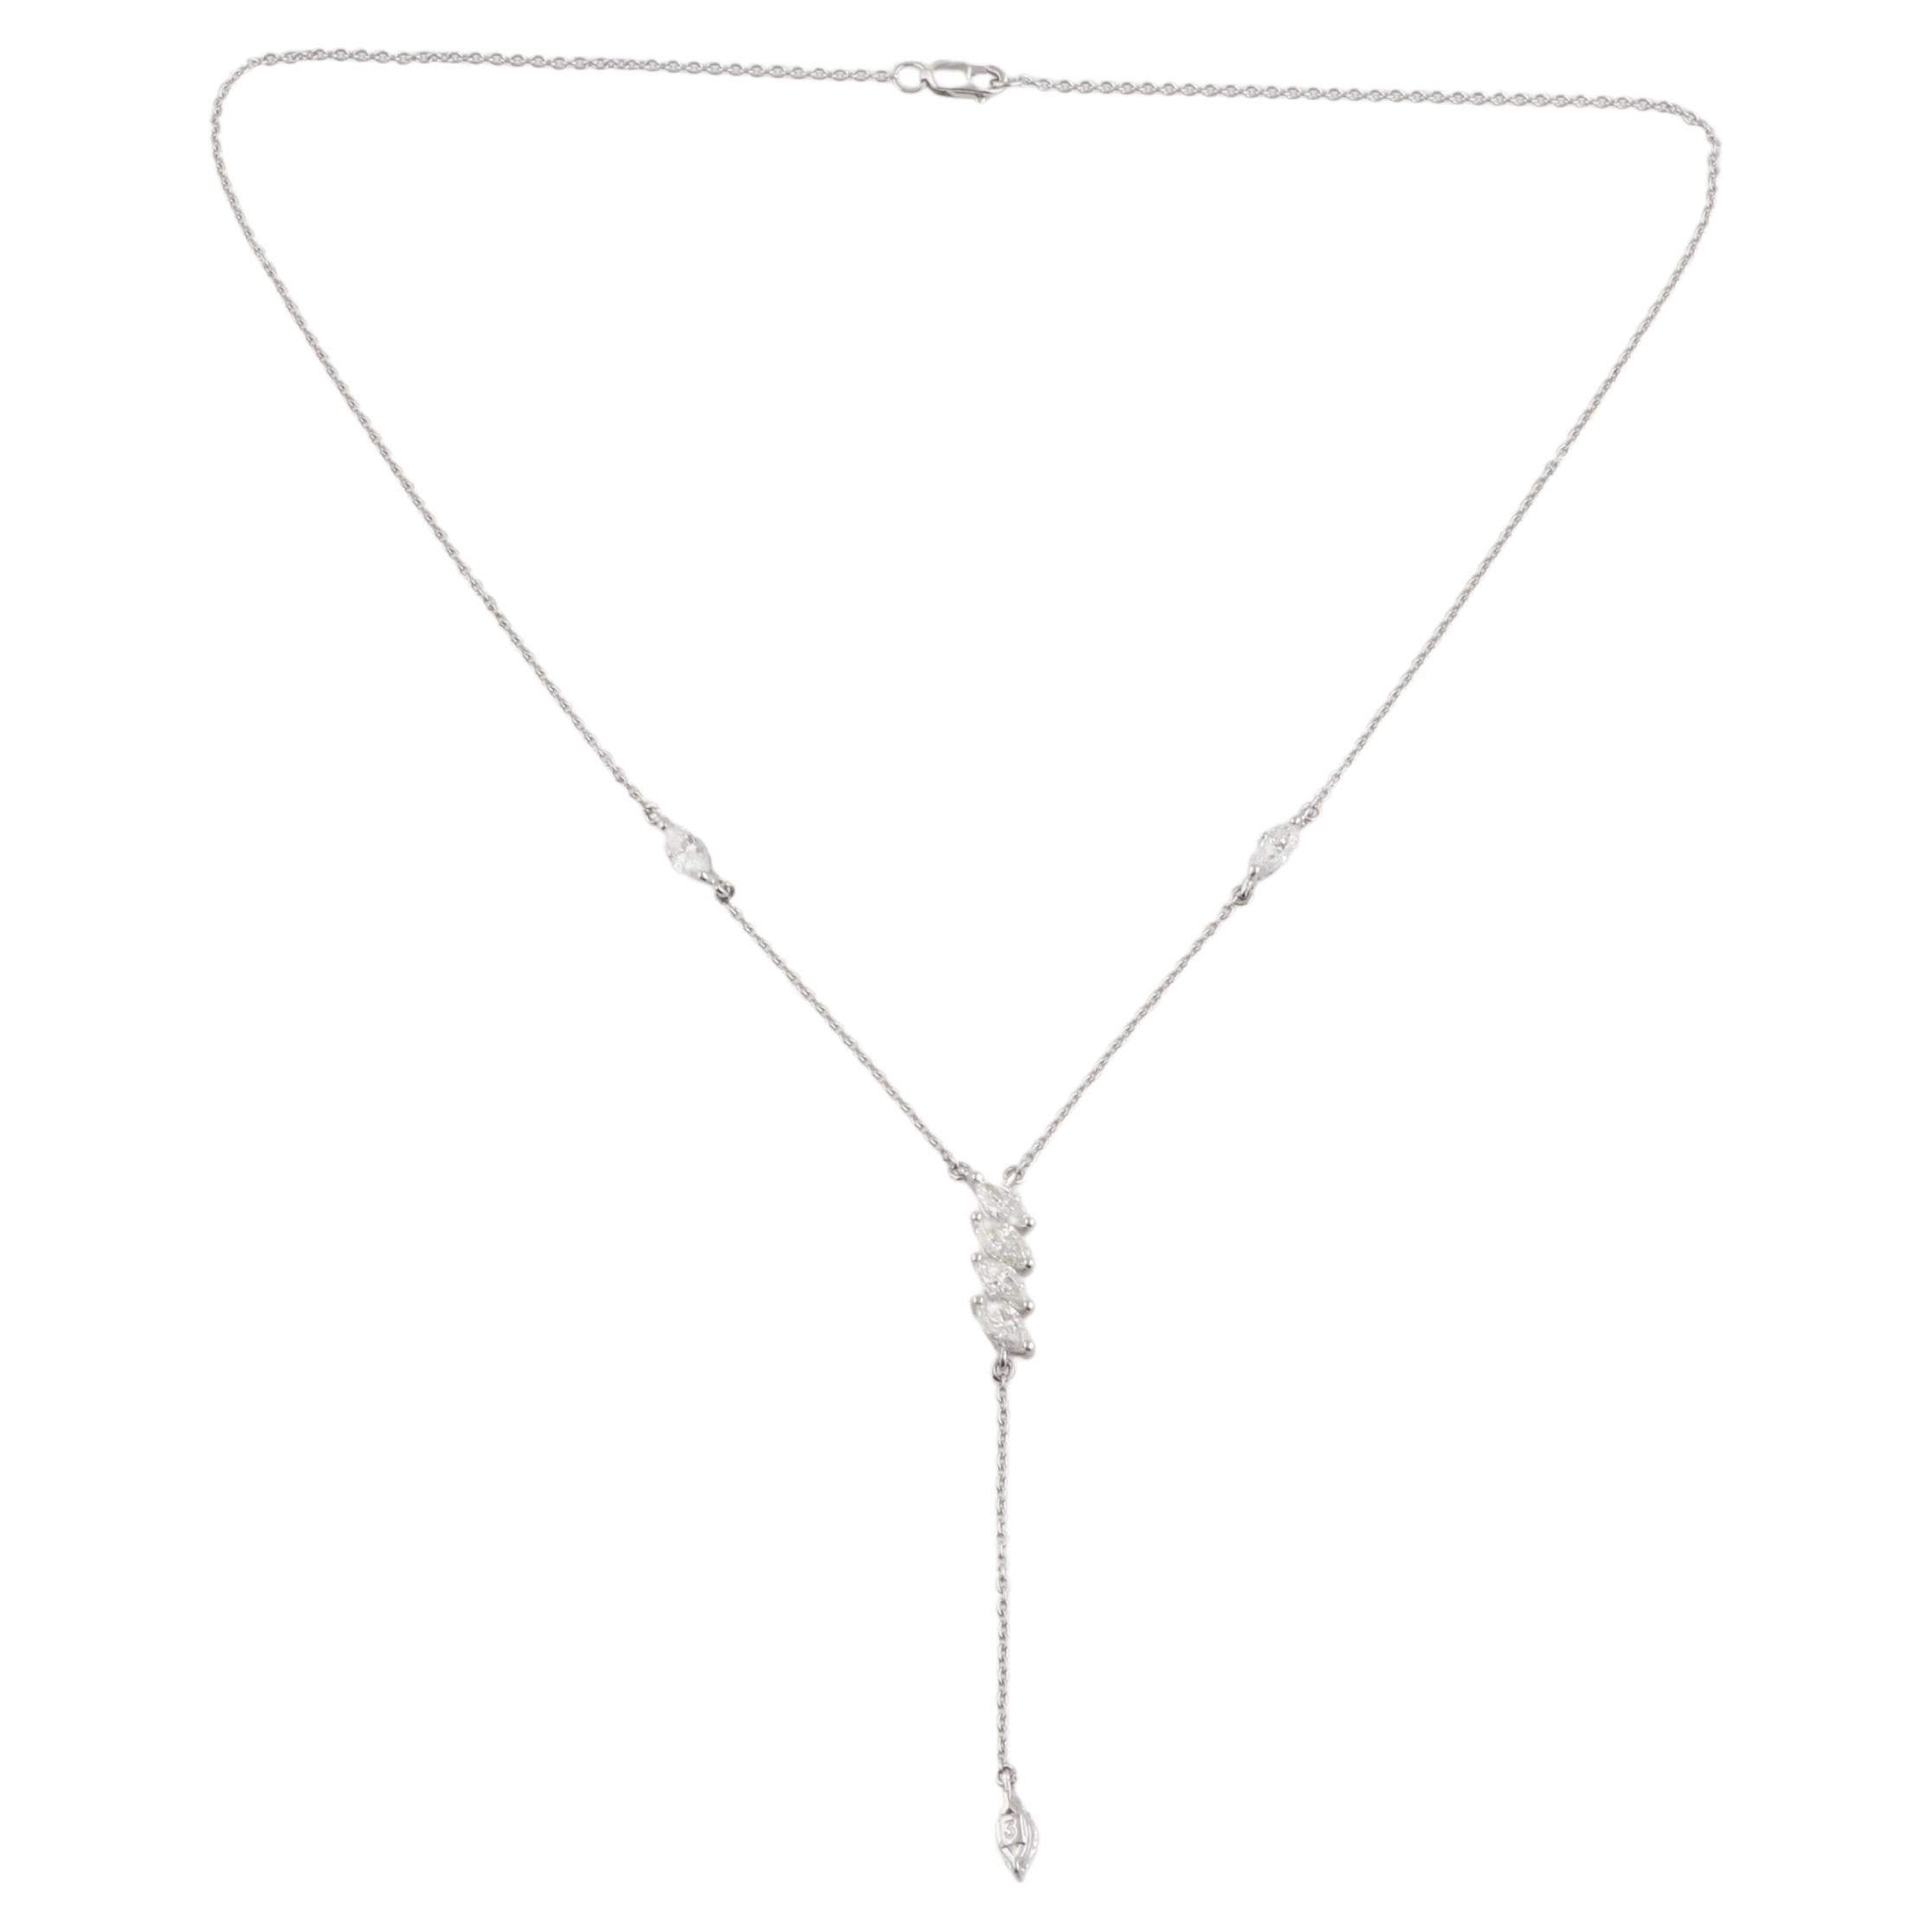 1.85 Ct SI Clarity HI Color Marquise Diamond Lariat Necklace 18 Karat White Gold For Sale